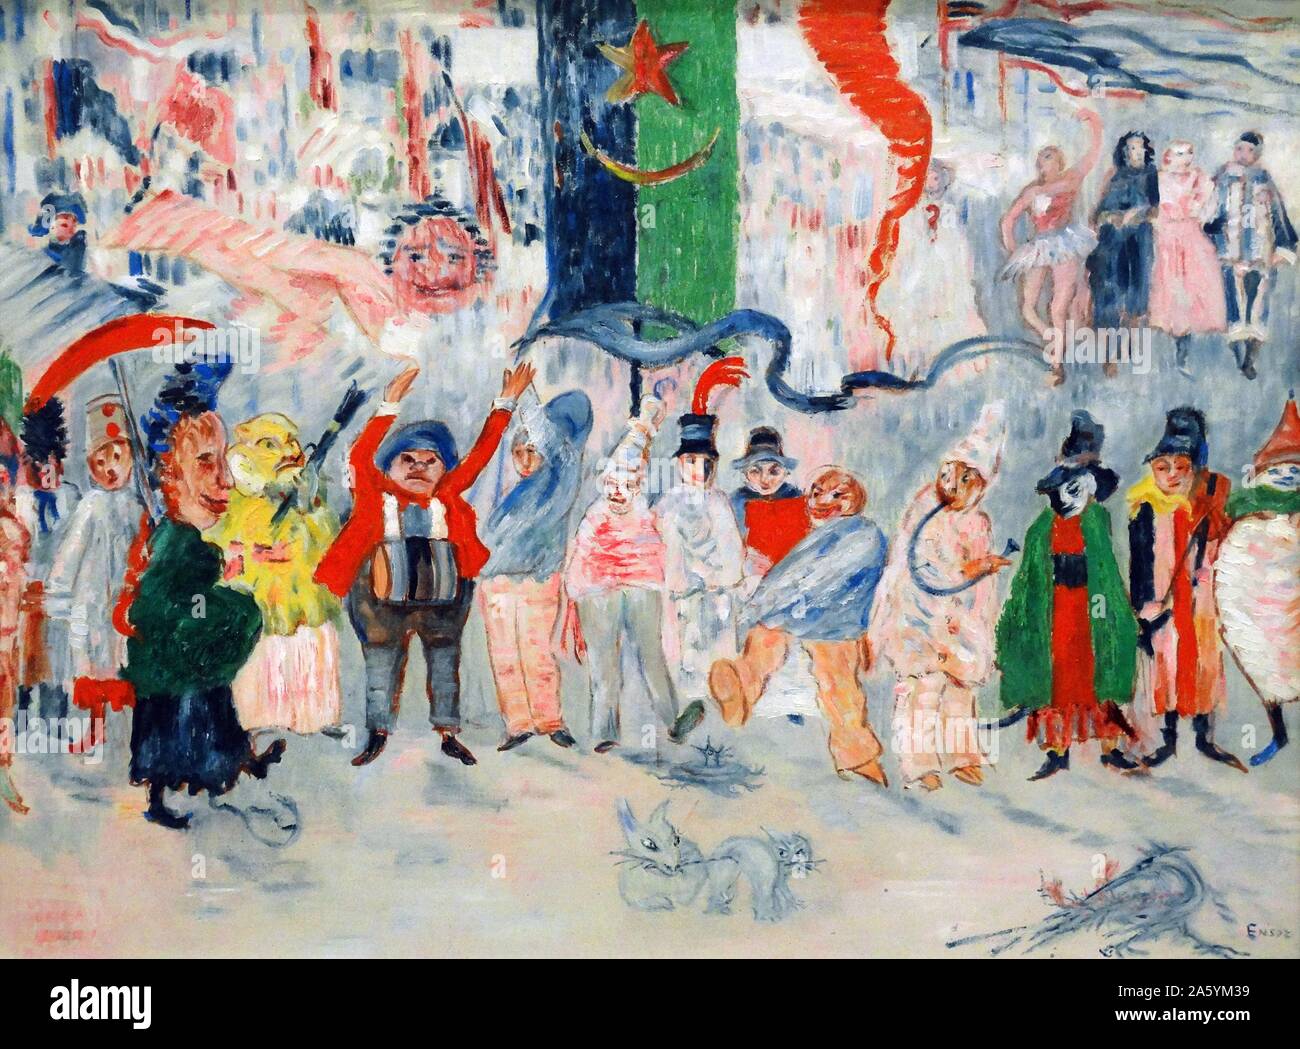 Carnival in Flanders oil on canvas) by James Ensor (1860-1949) was a Belgian painter and printmaker, an important influence on expressionism and surrealism who lived in Ostend for almost his entire life. Stock Photo